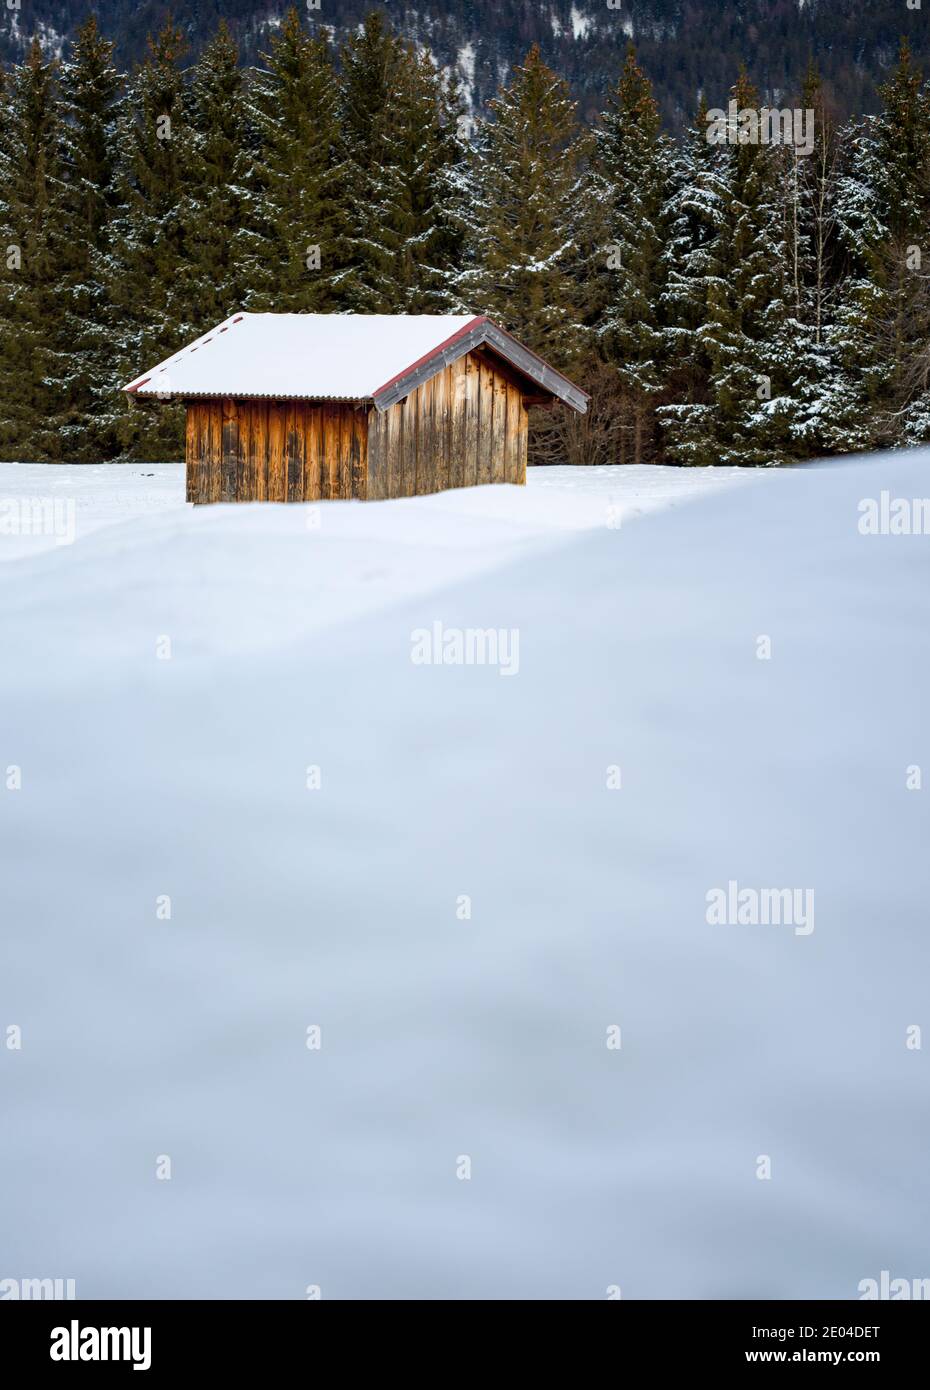 wooden hut in snowy winter forest Stock Photo